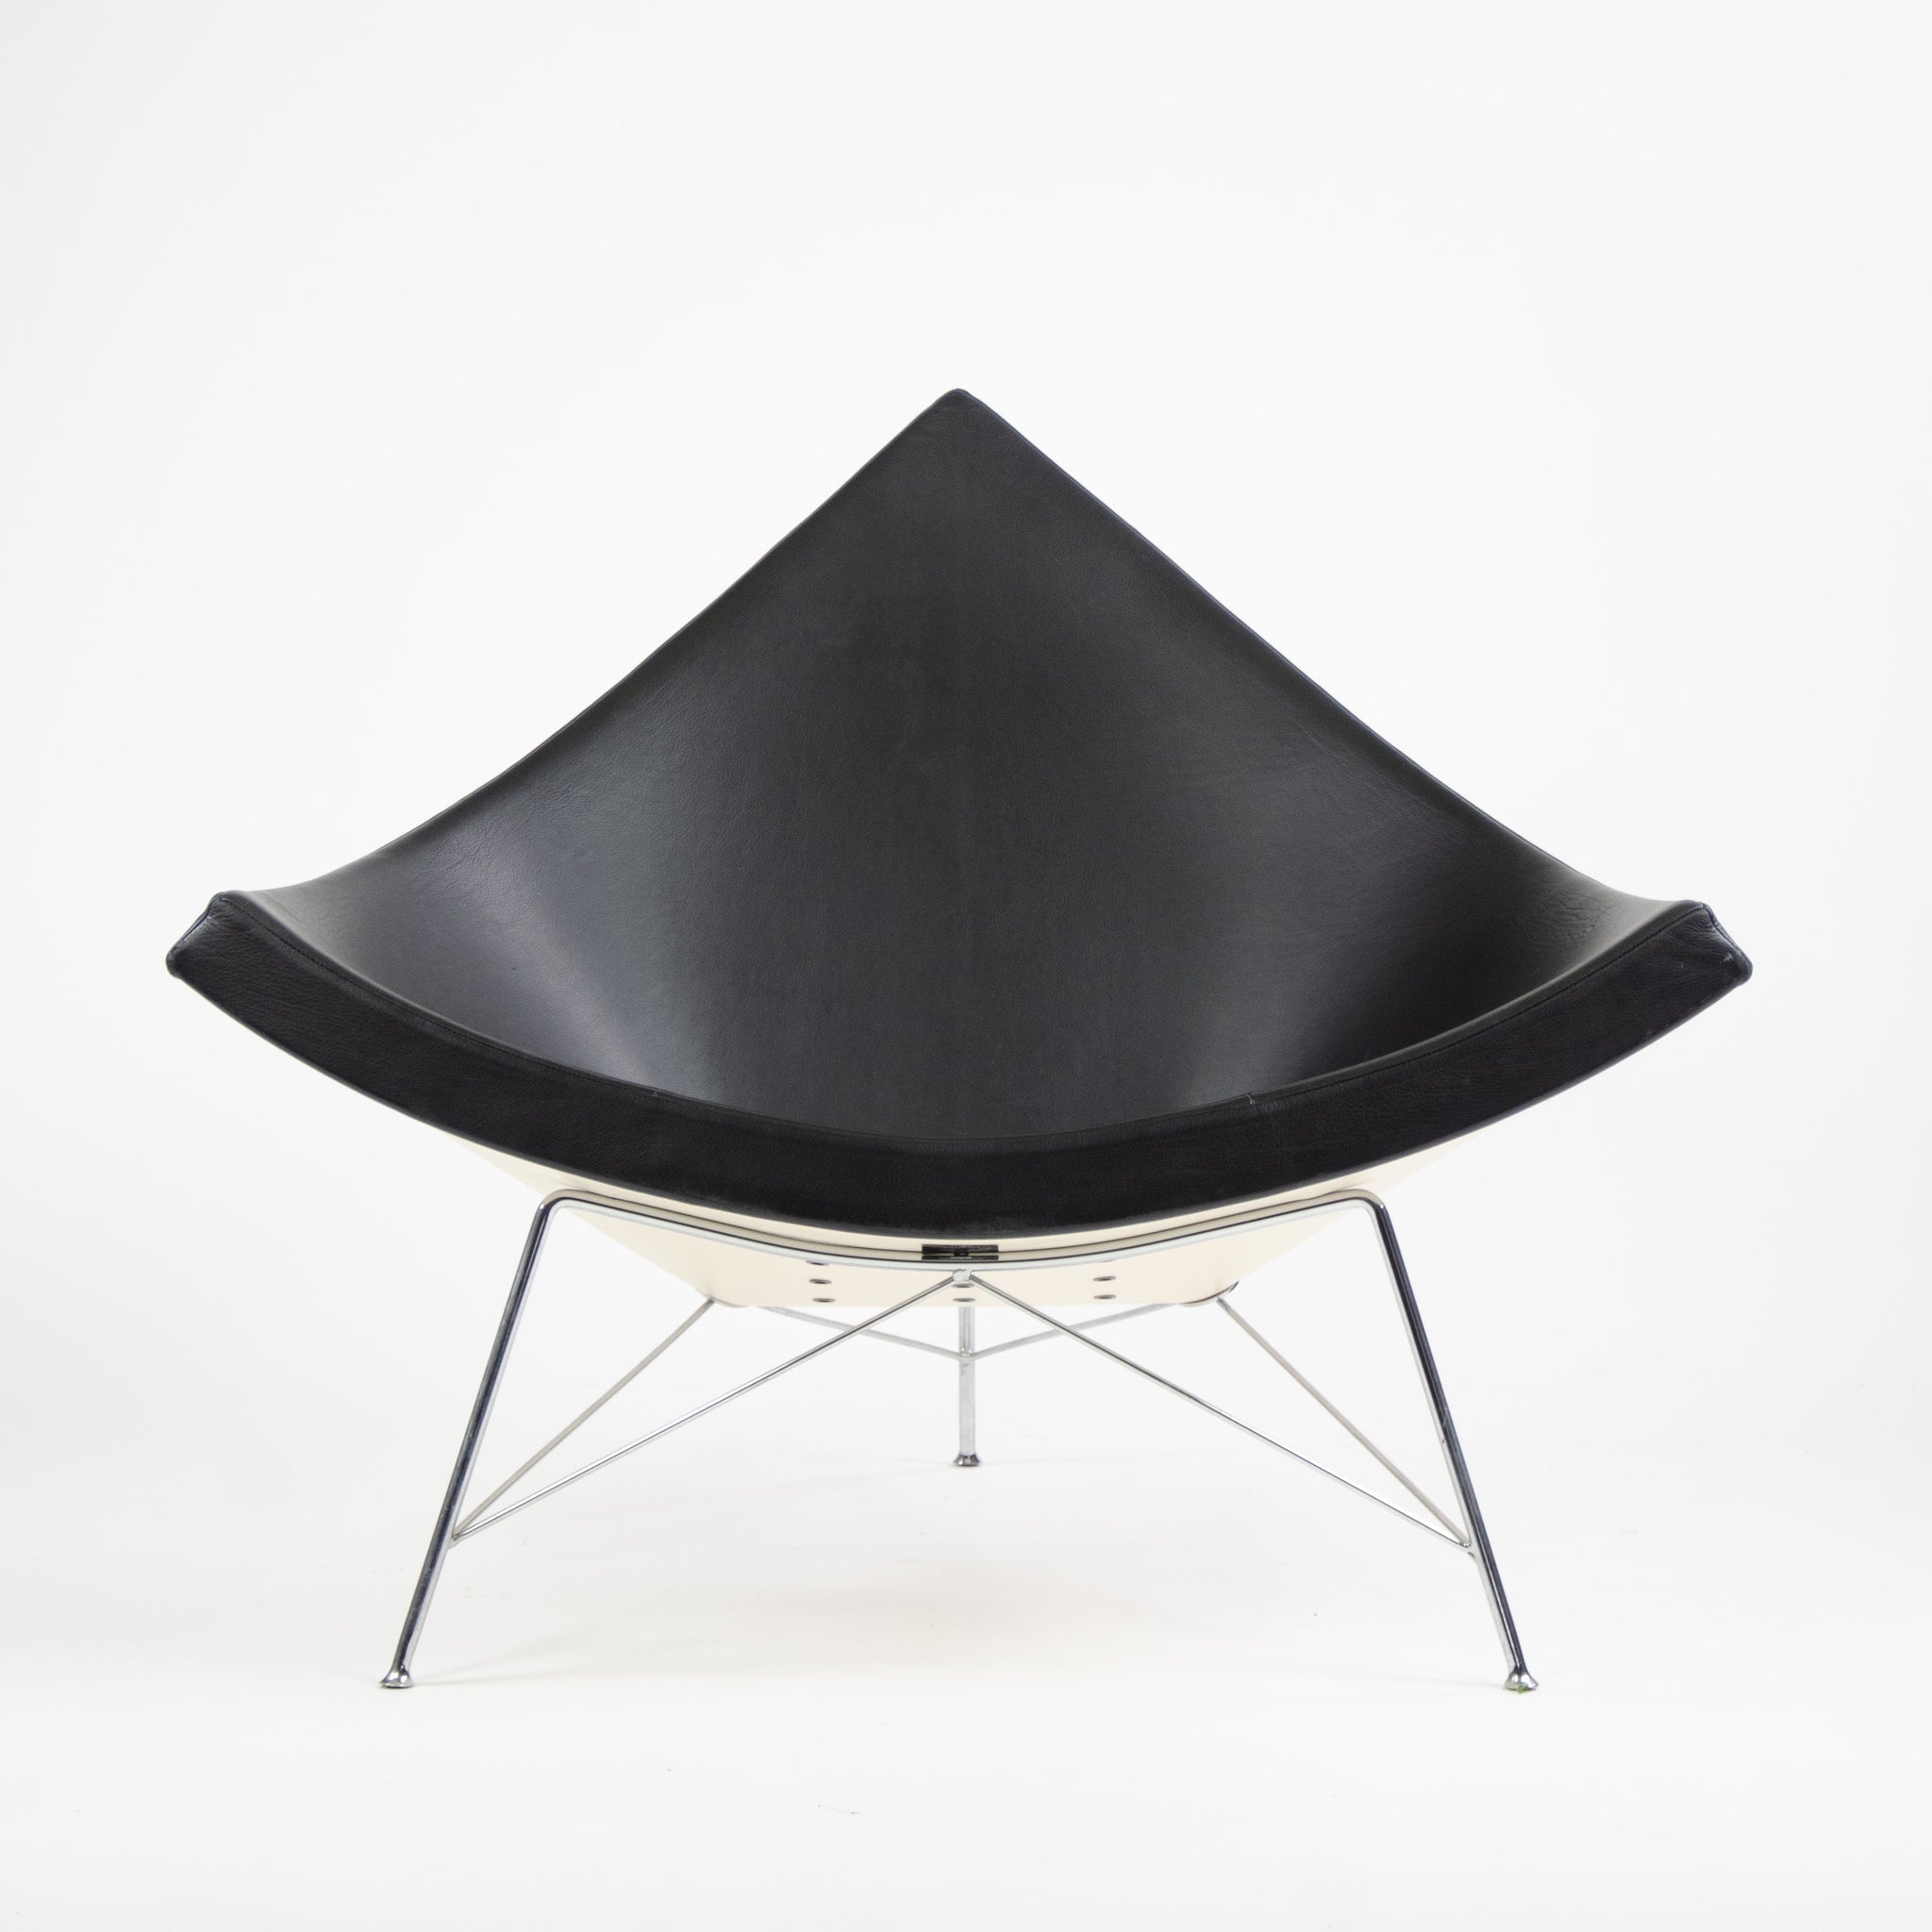 SOLD 2003 Vitra Herman Miller George Nelson Coconut Chair Black Leather MINT 2x Available